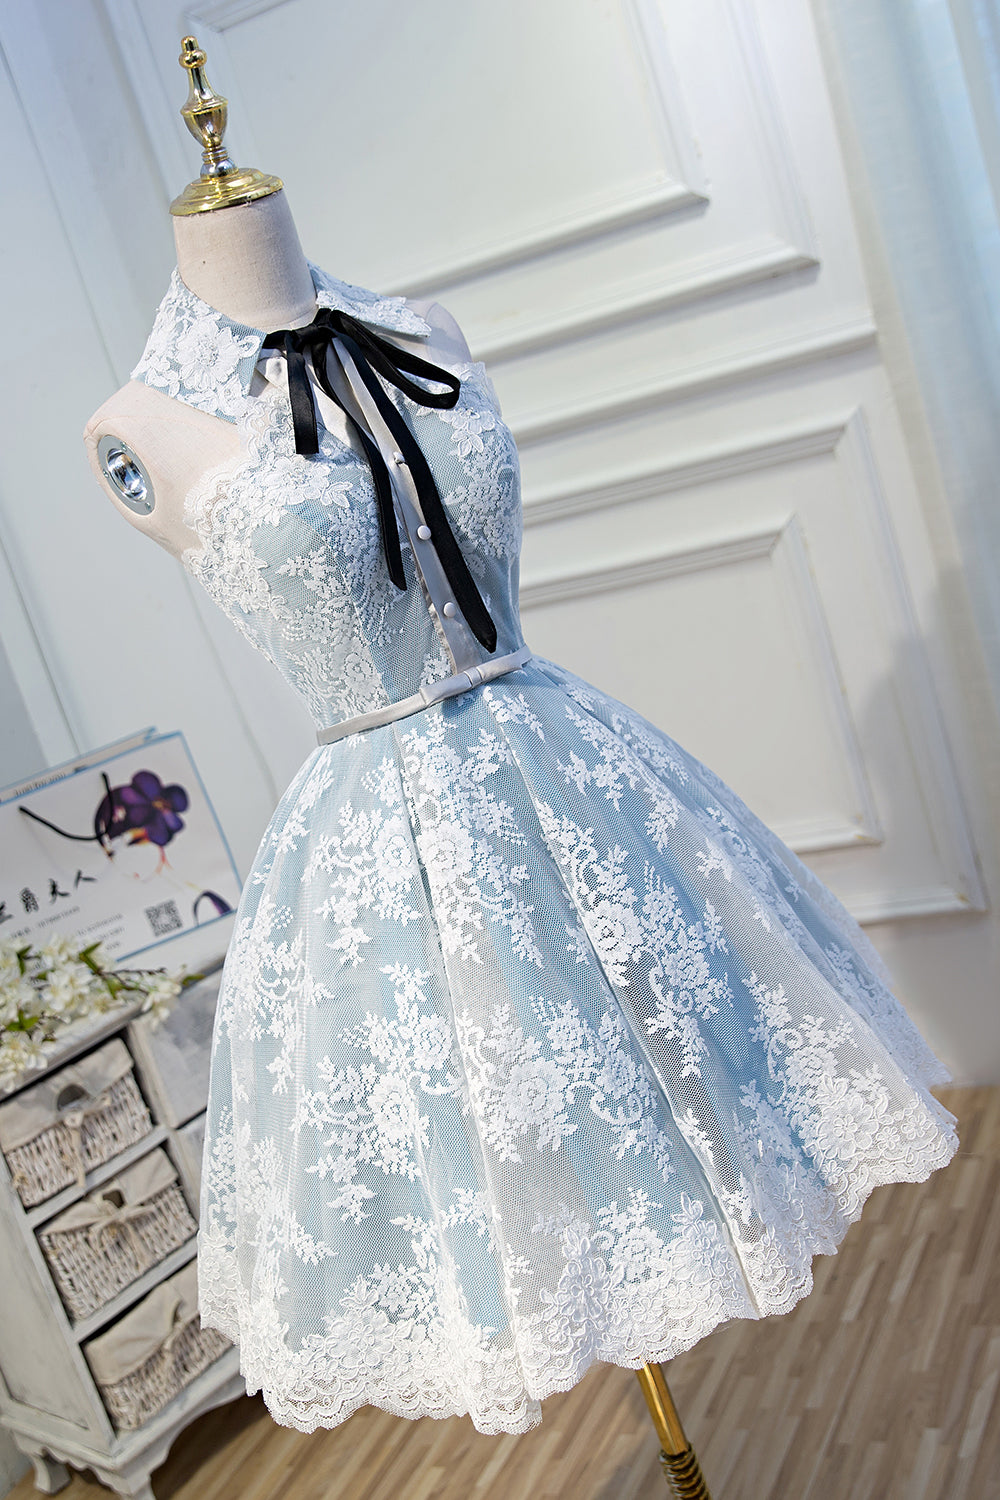 Cute Light Sky Blue Halter Homecoming Dresses with Lace Appliques